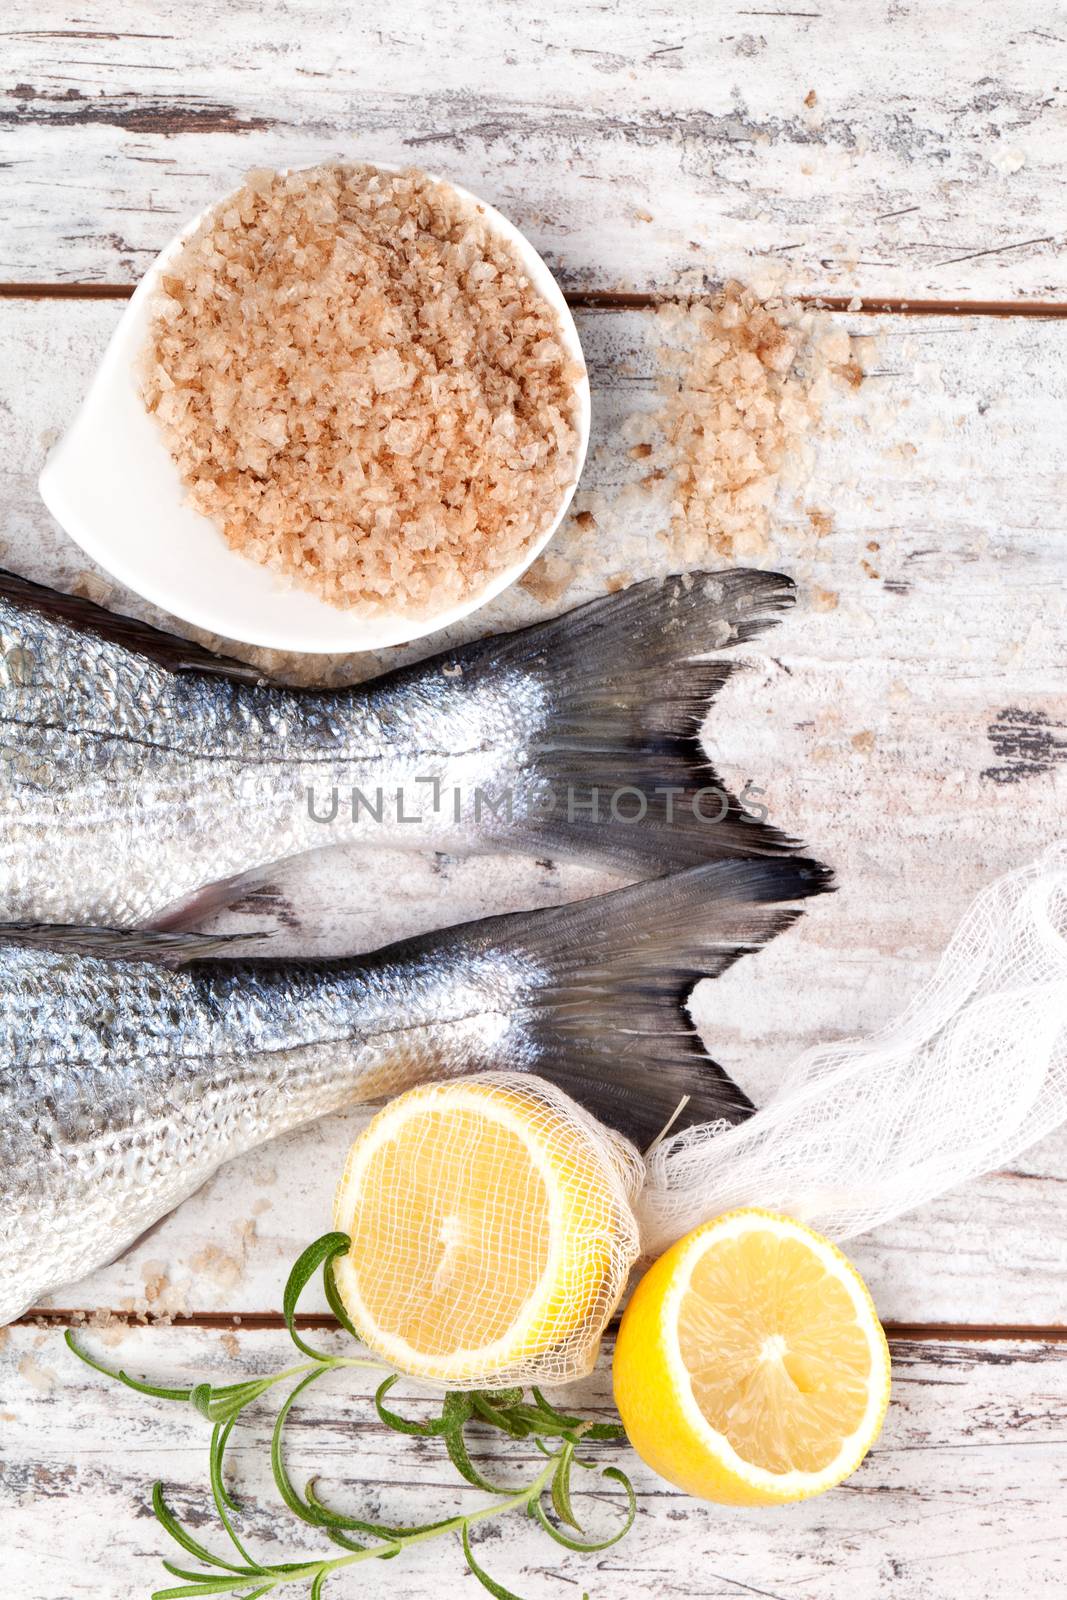 Delicious mediterranean seafood concept. Two fresh fish tail, lemon and fresh herbs on white textured wooden background. Culinary seafood concept in marine white.